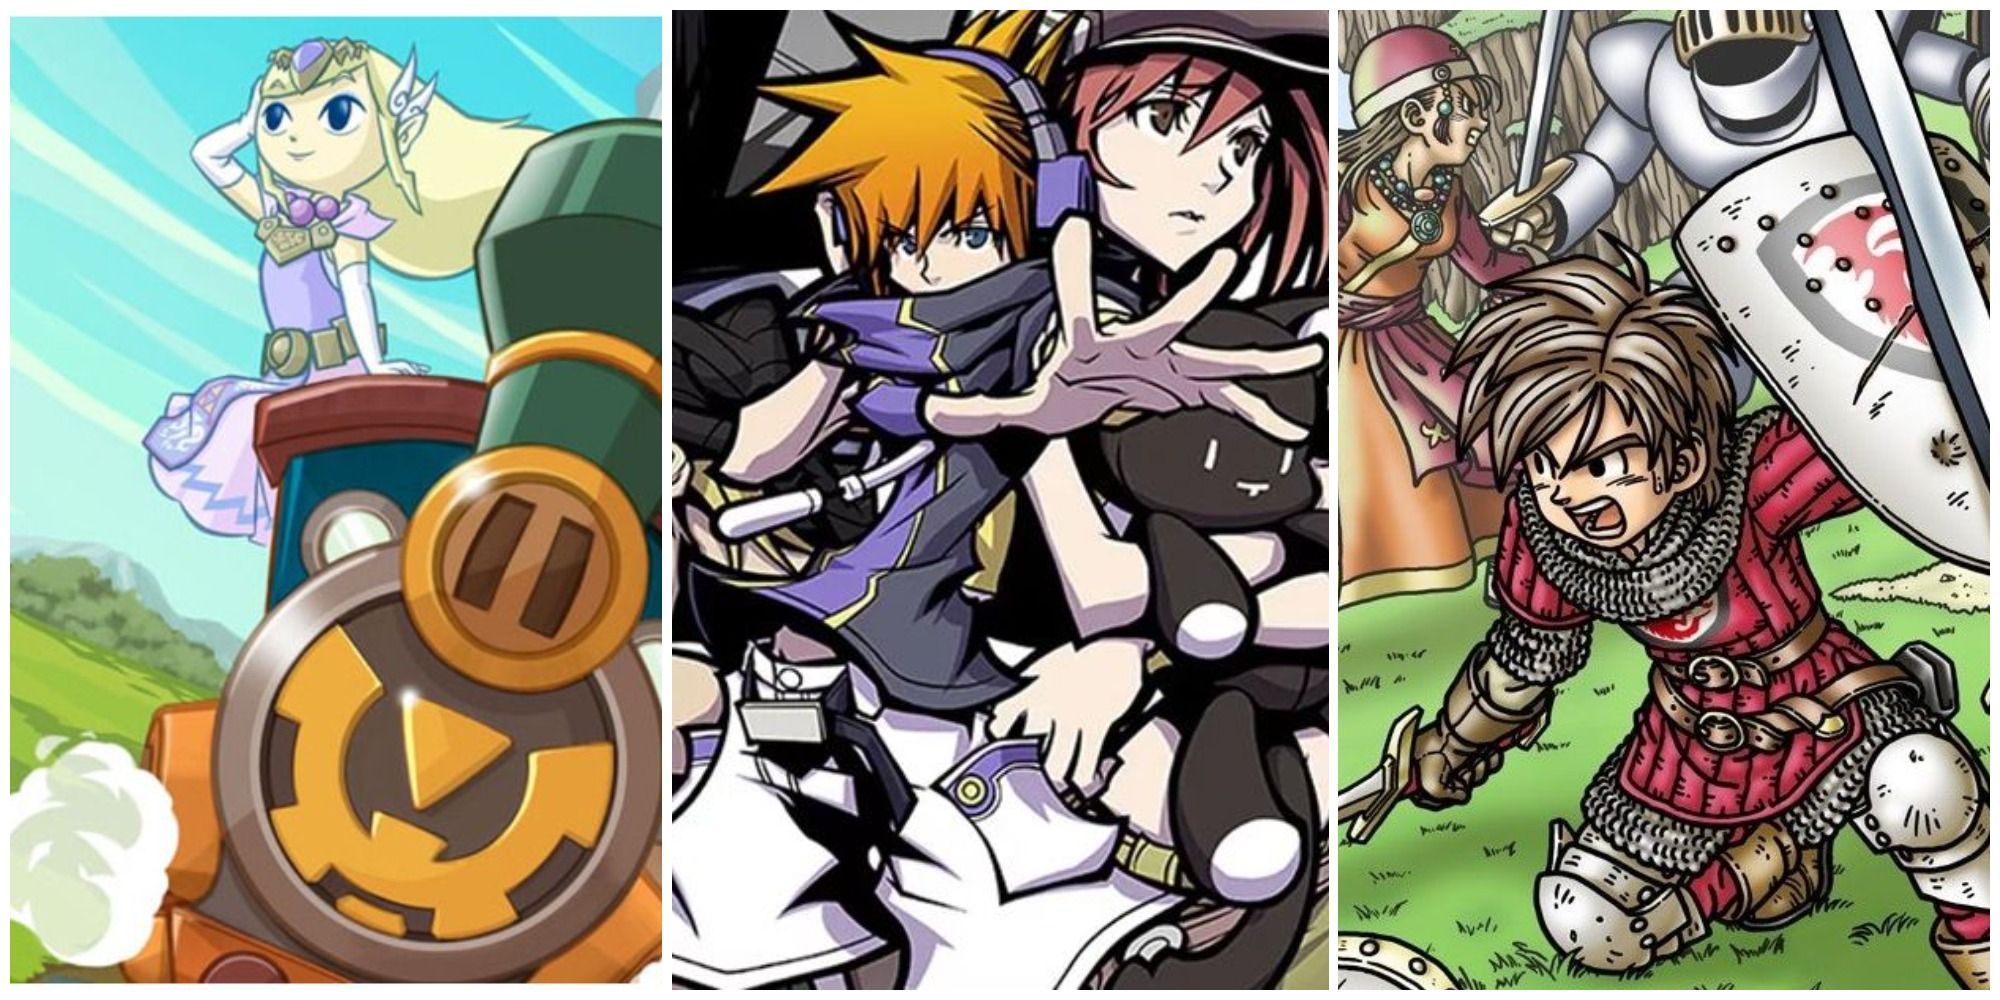 Top Surprisingly Fun Games on Nintendo DS Best Recommendations